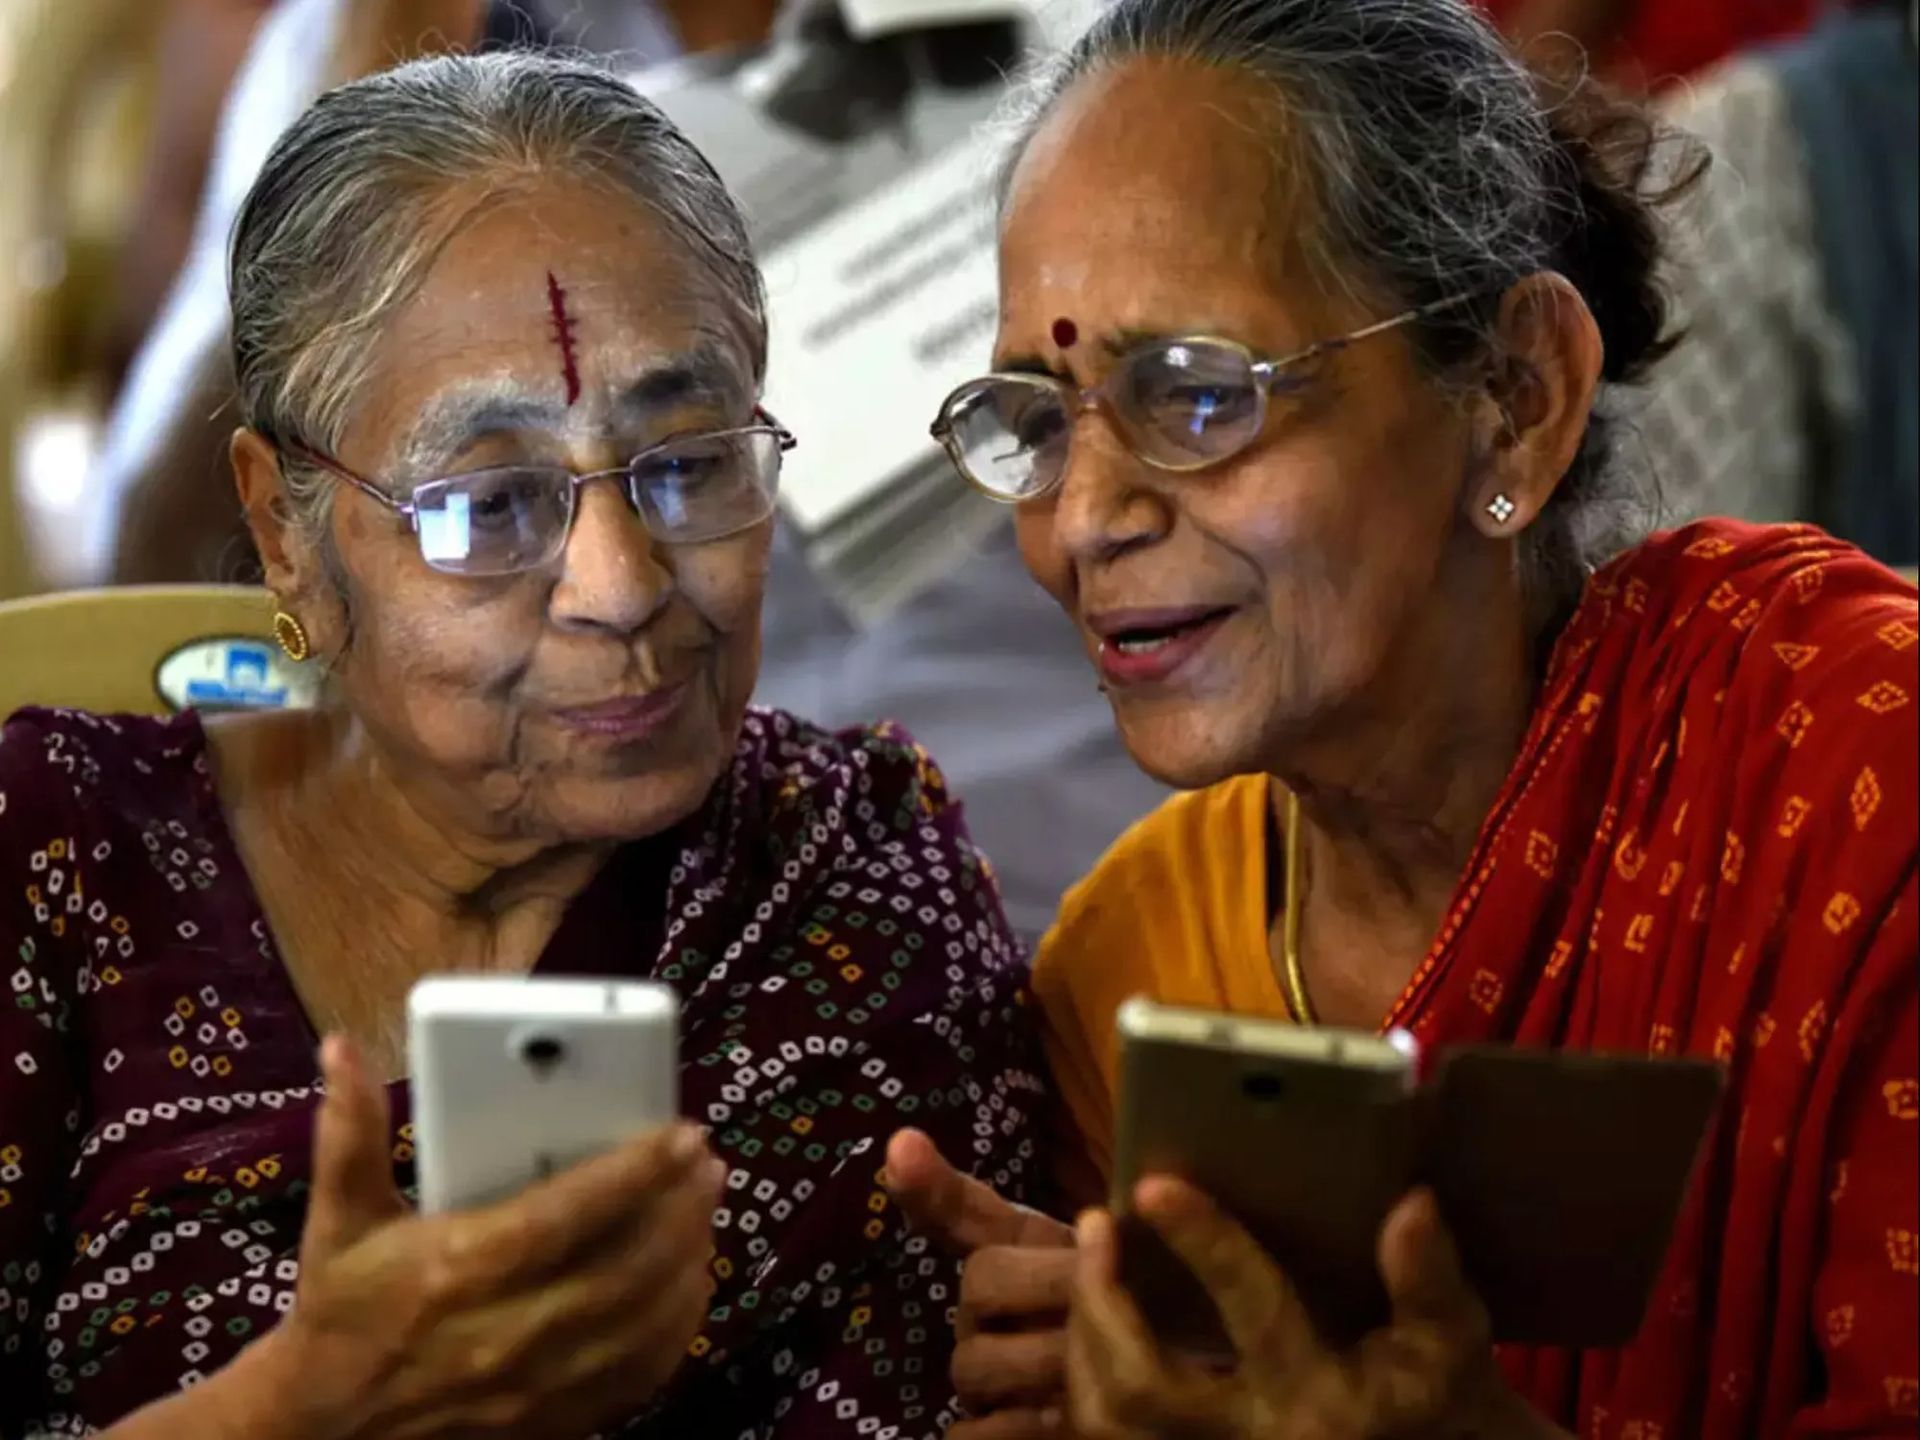 two older women are looking at a cell phone together .